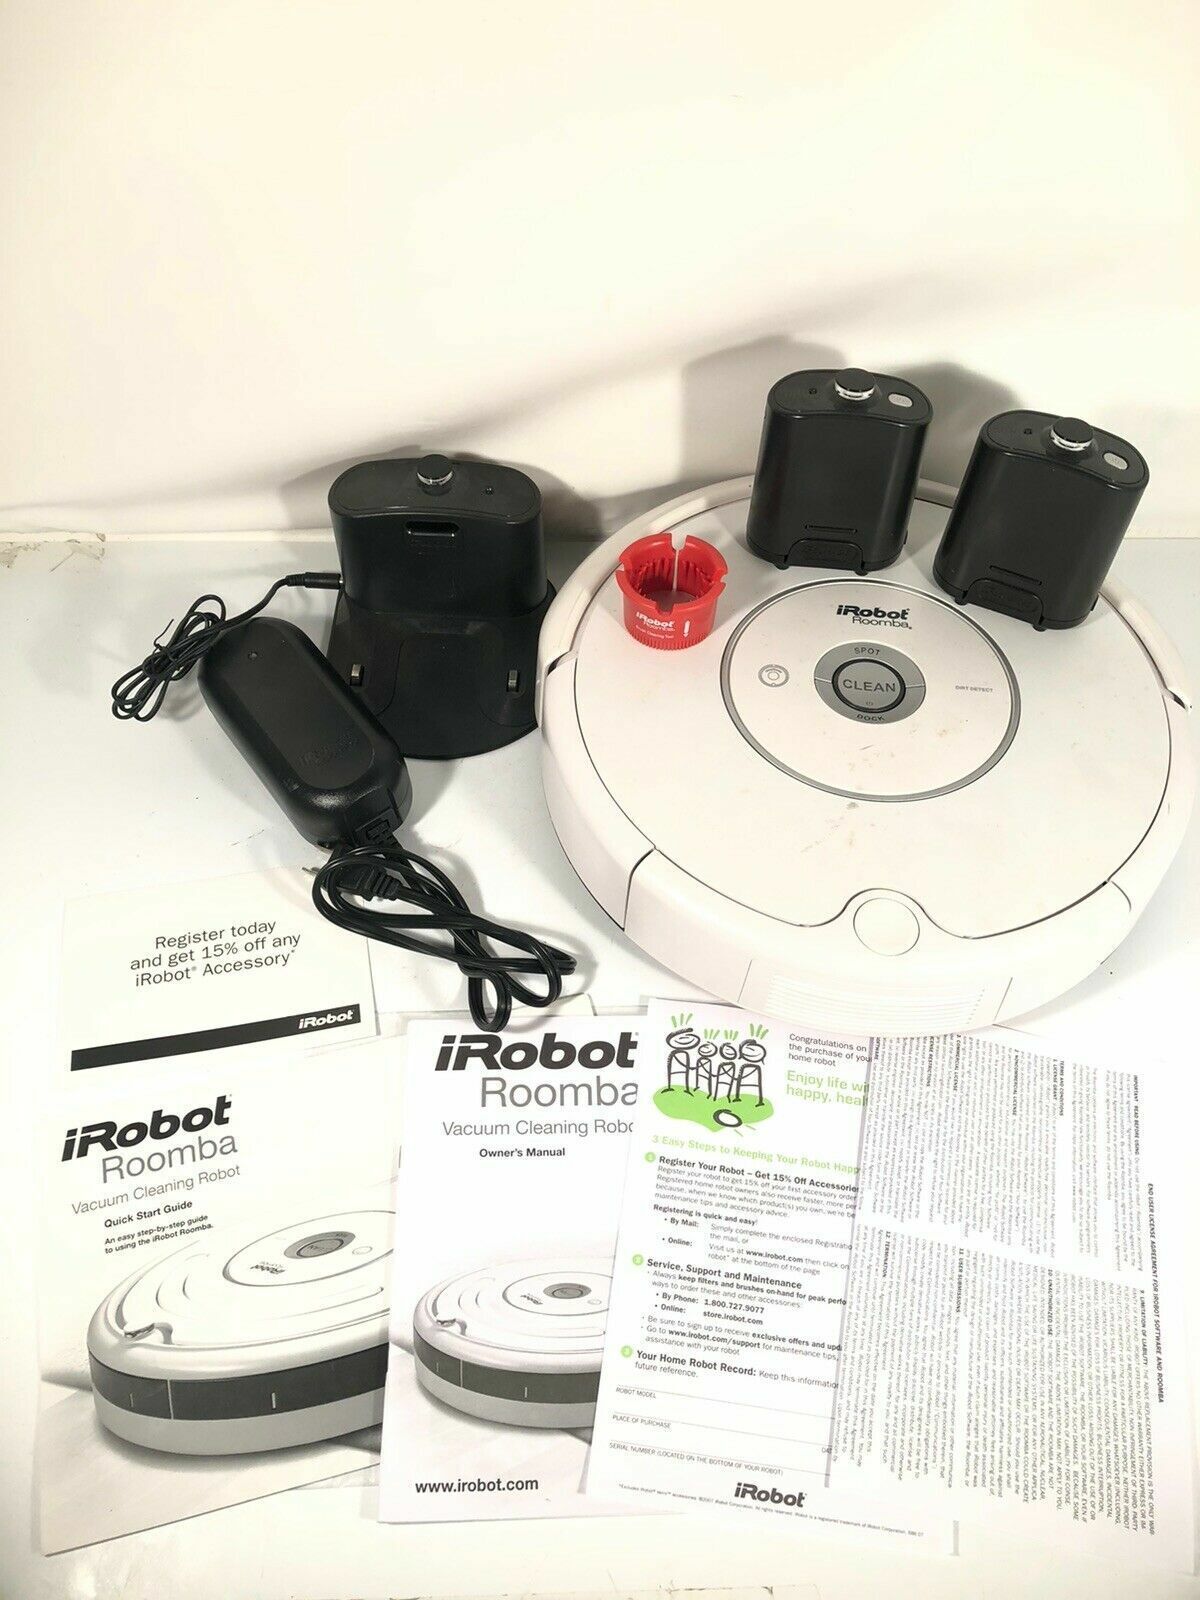 Primary image for IRobot Roomba Vacuum Cleaning Robot Model 531 Untested Parts Restoration Or Use